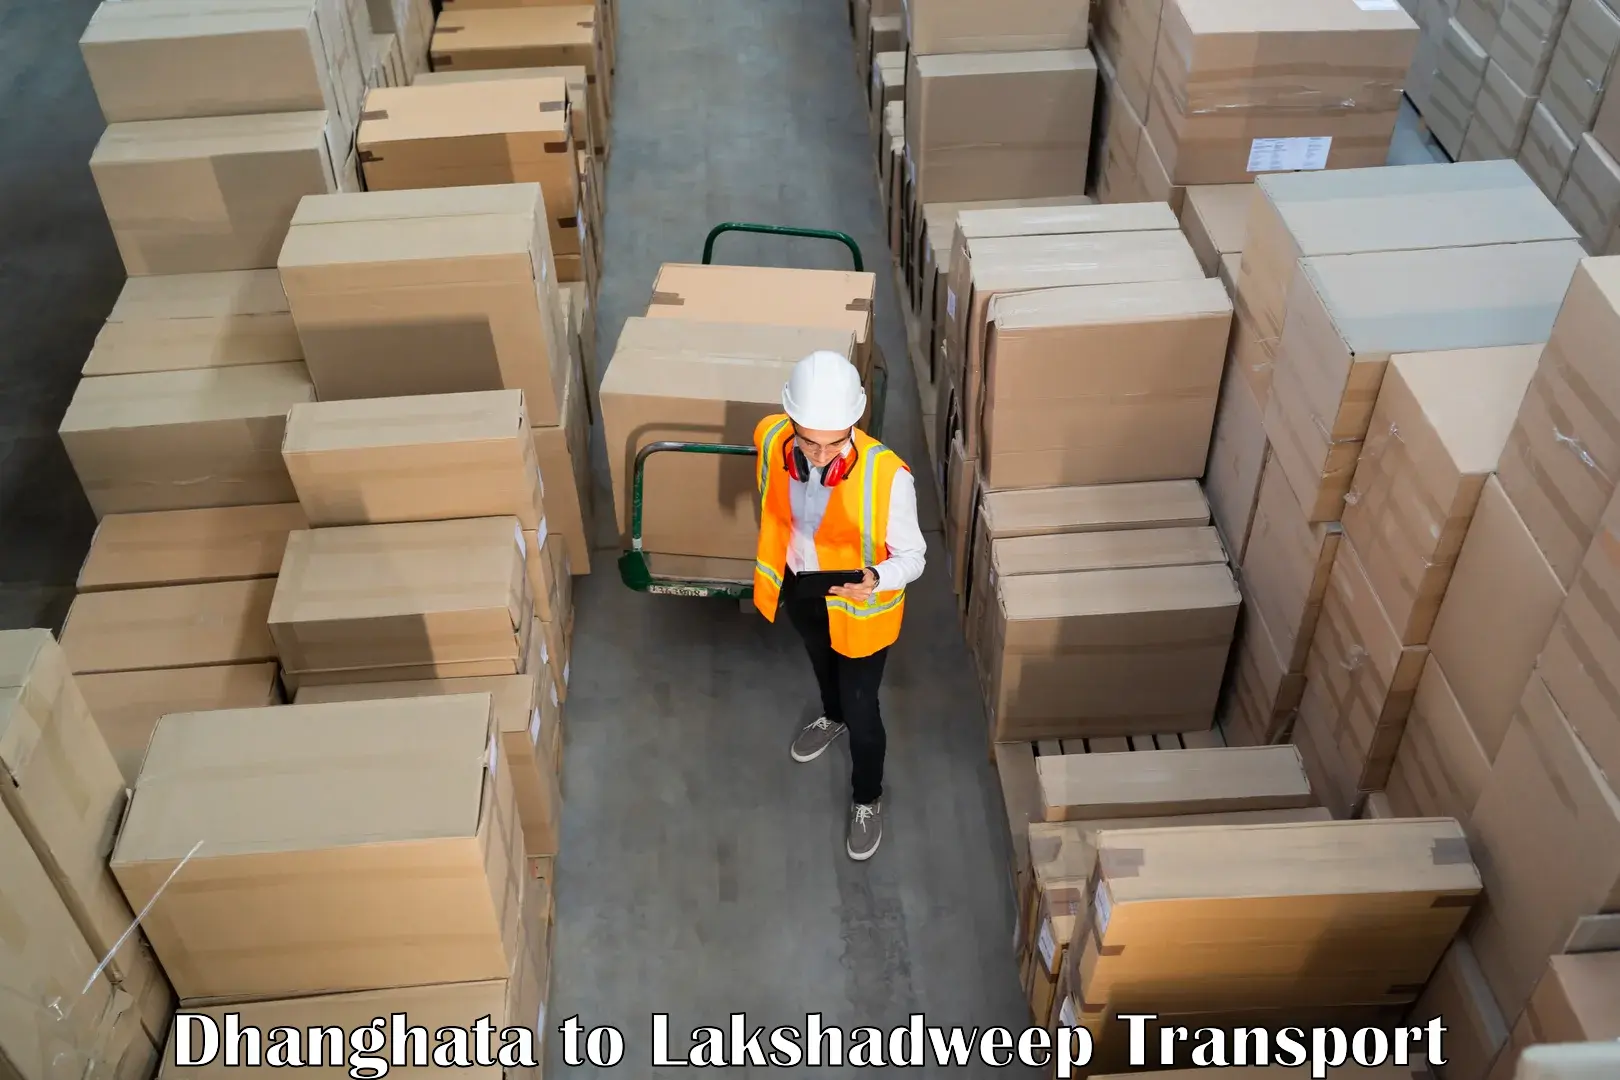 Goods delivery service Dhanghata to Lakshadweep